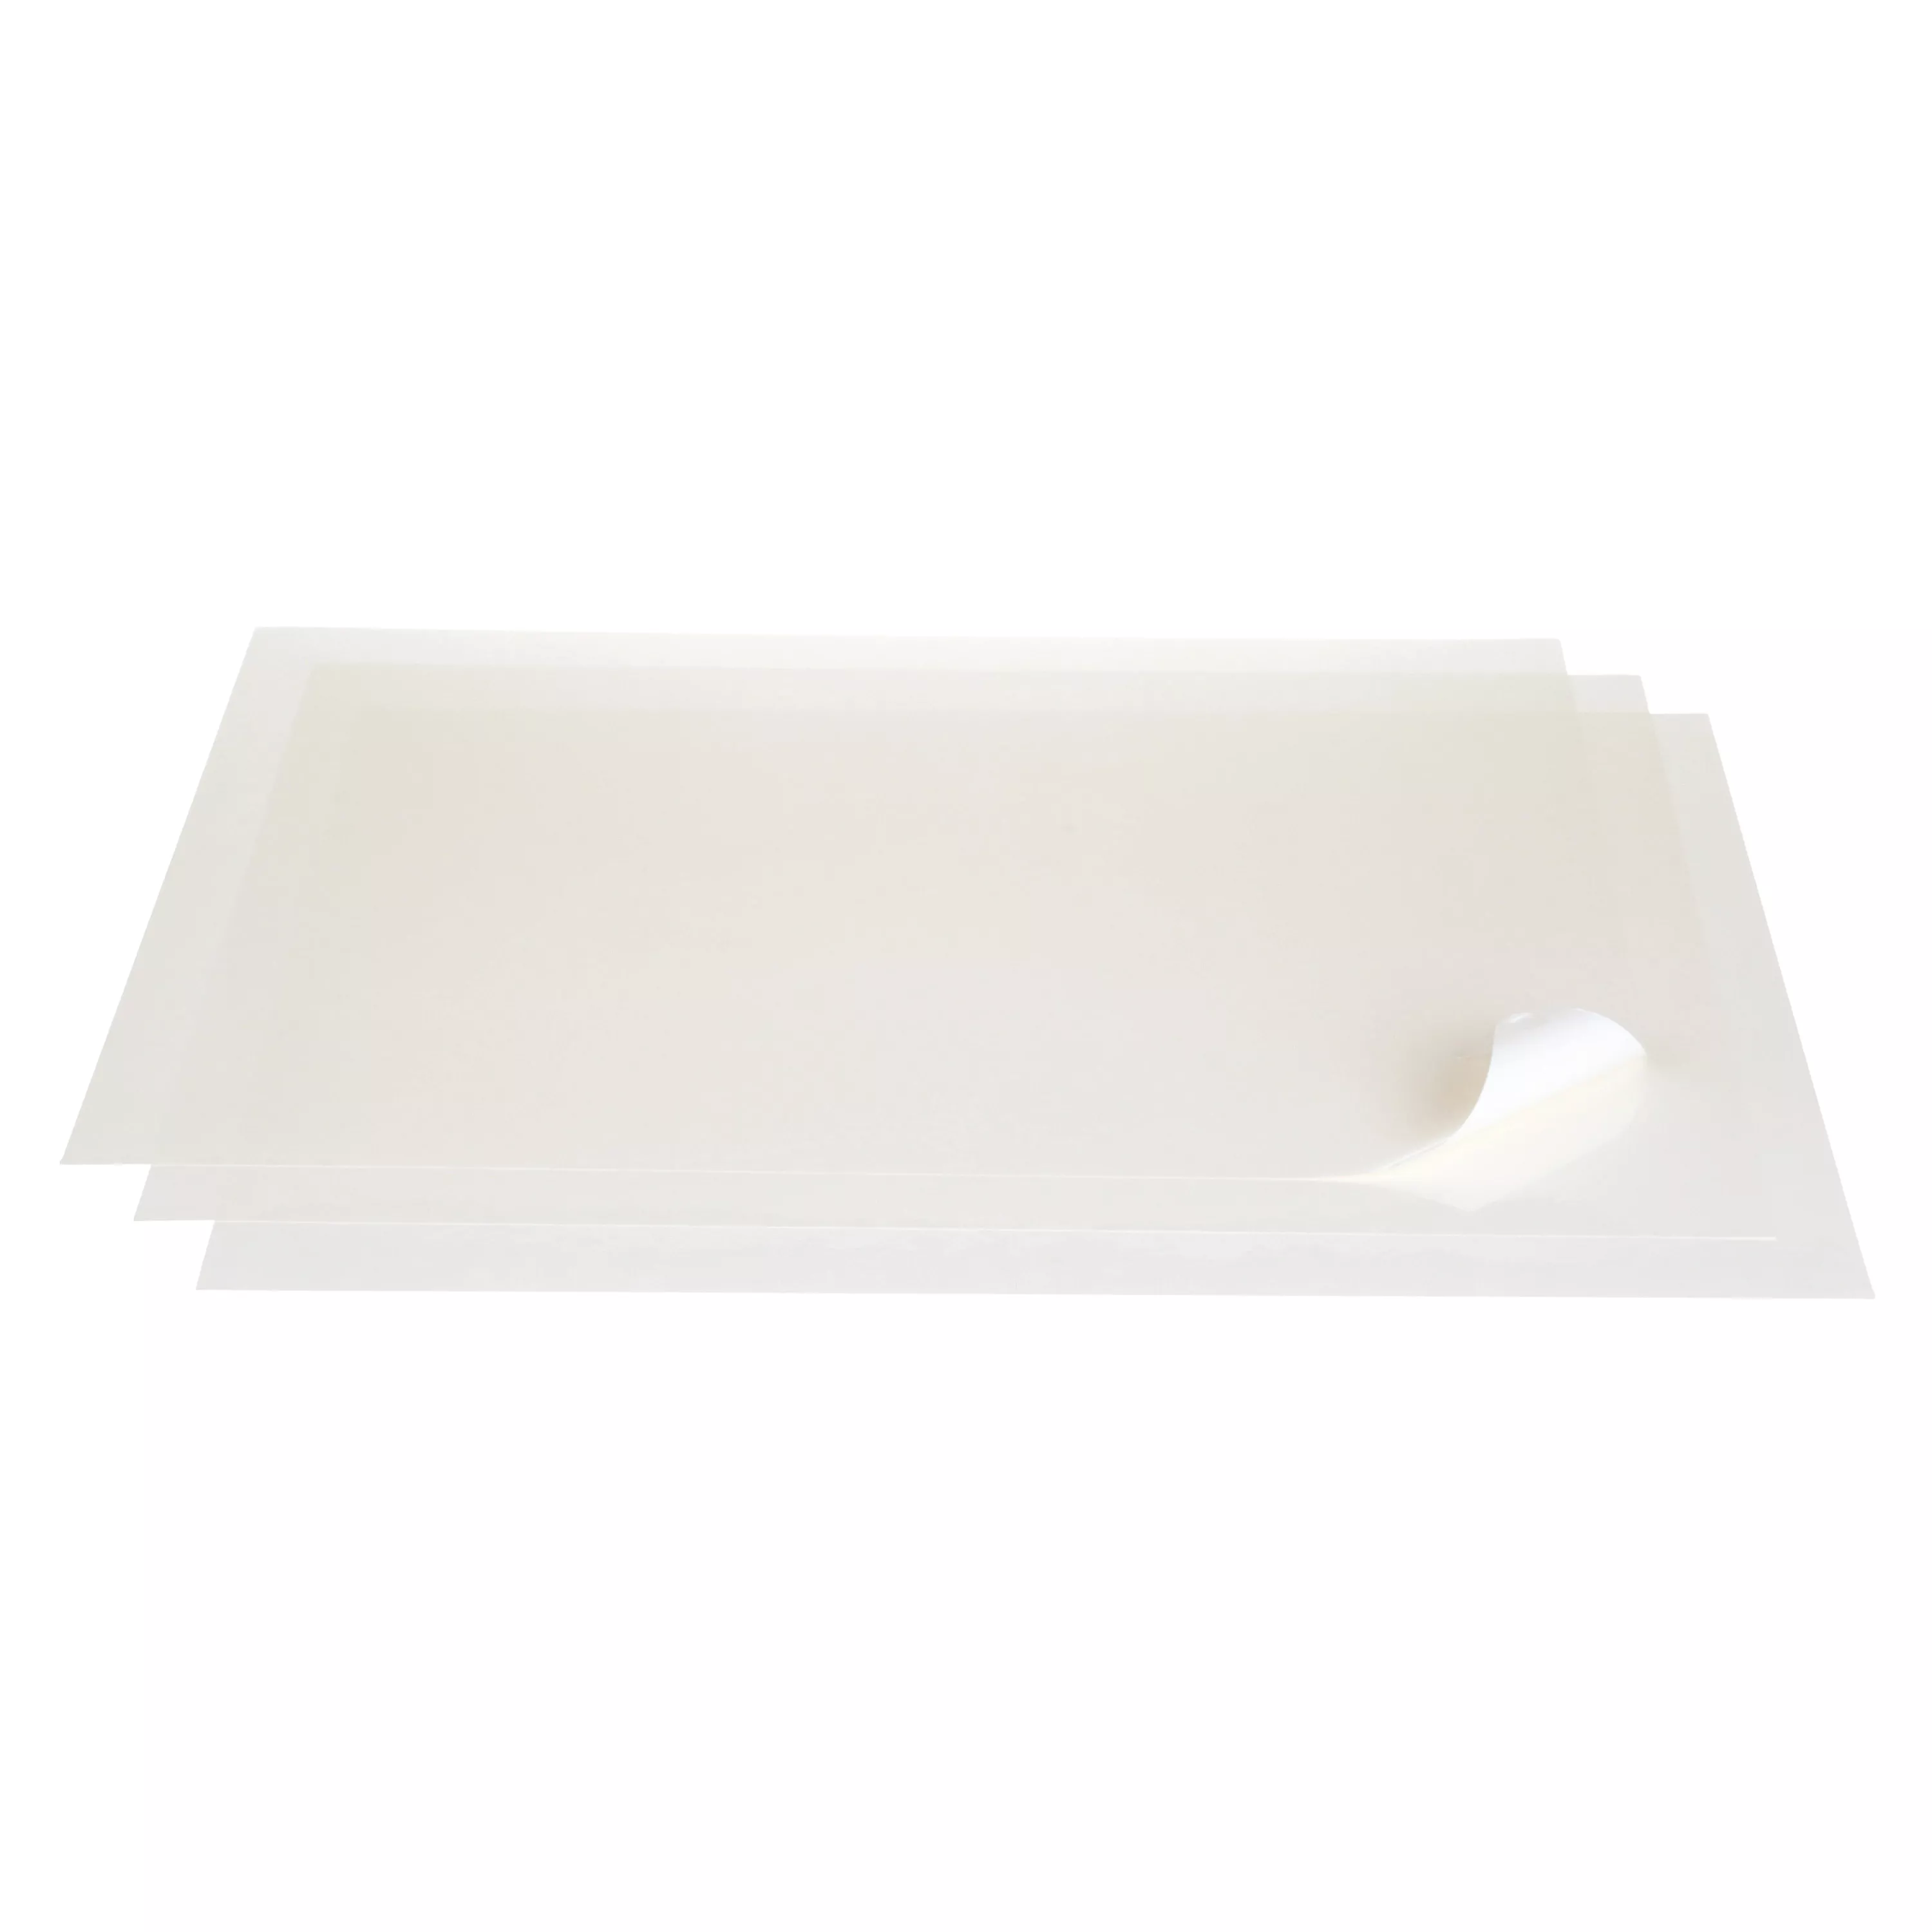 3M™ Sheet and Screen Label Material 7950, Clear Polyester, 508 mm x 686 mm, 100 Sheet/Case